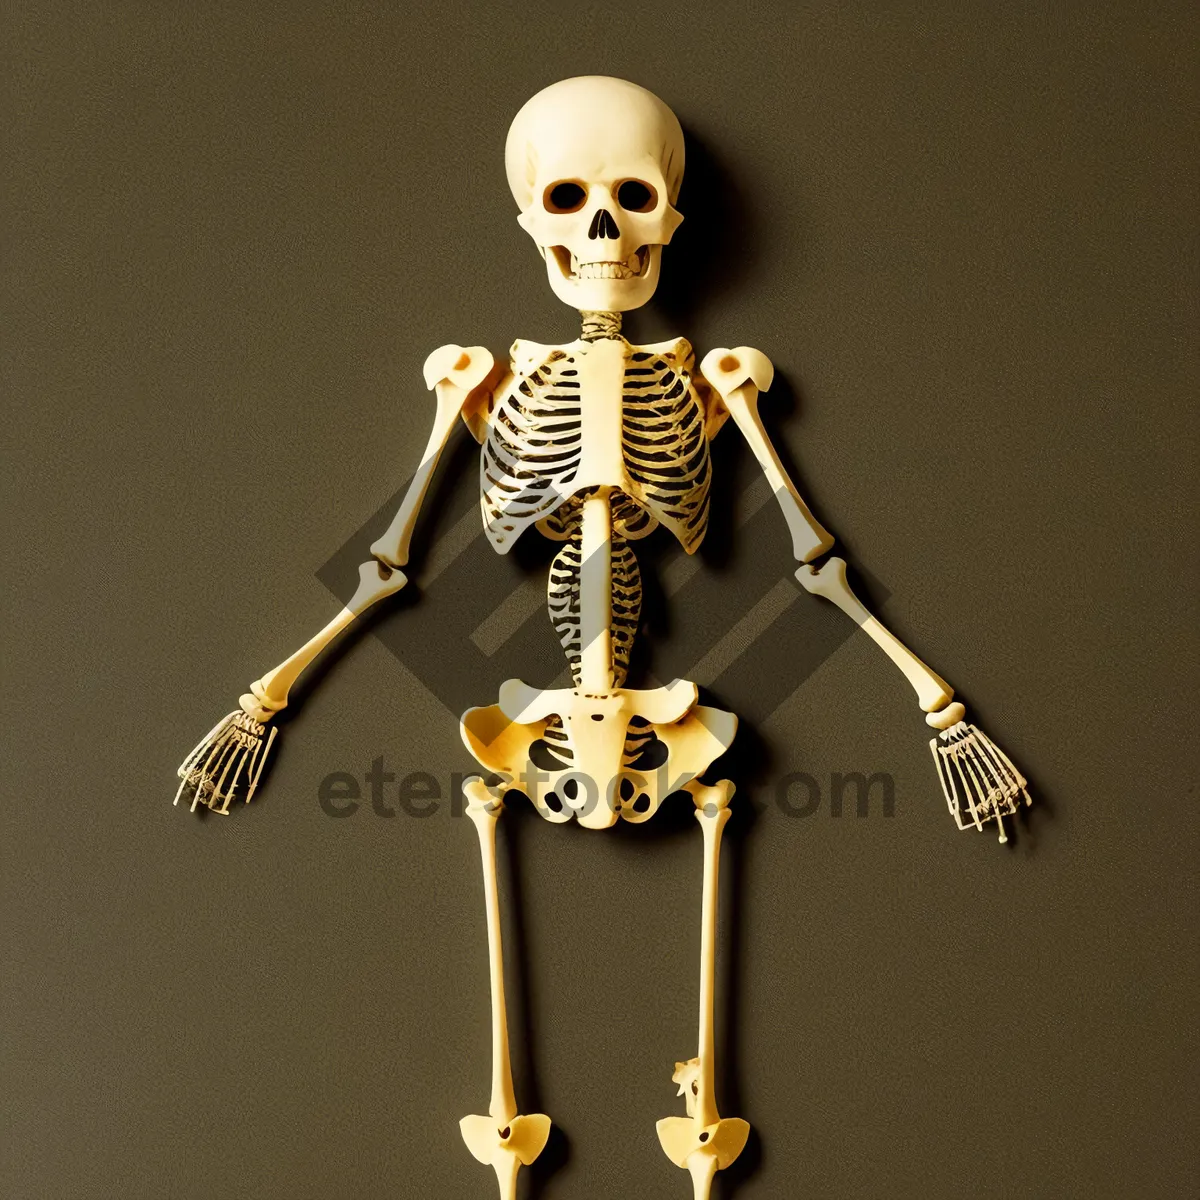 Picture of Skeletal Anatomy Doll Plaything - Medical Science 3D Image